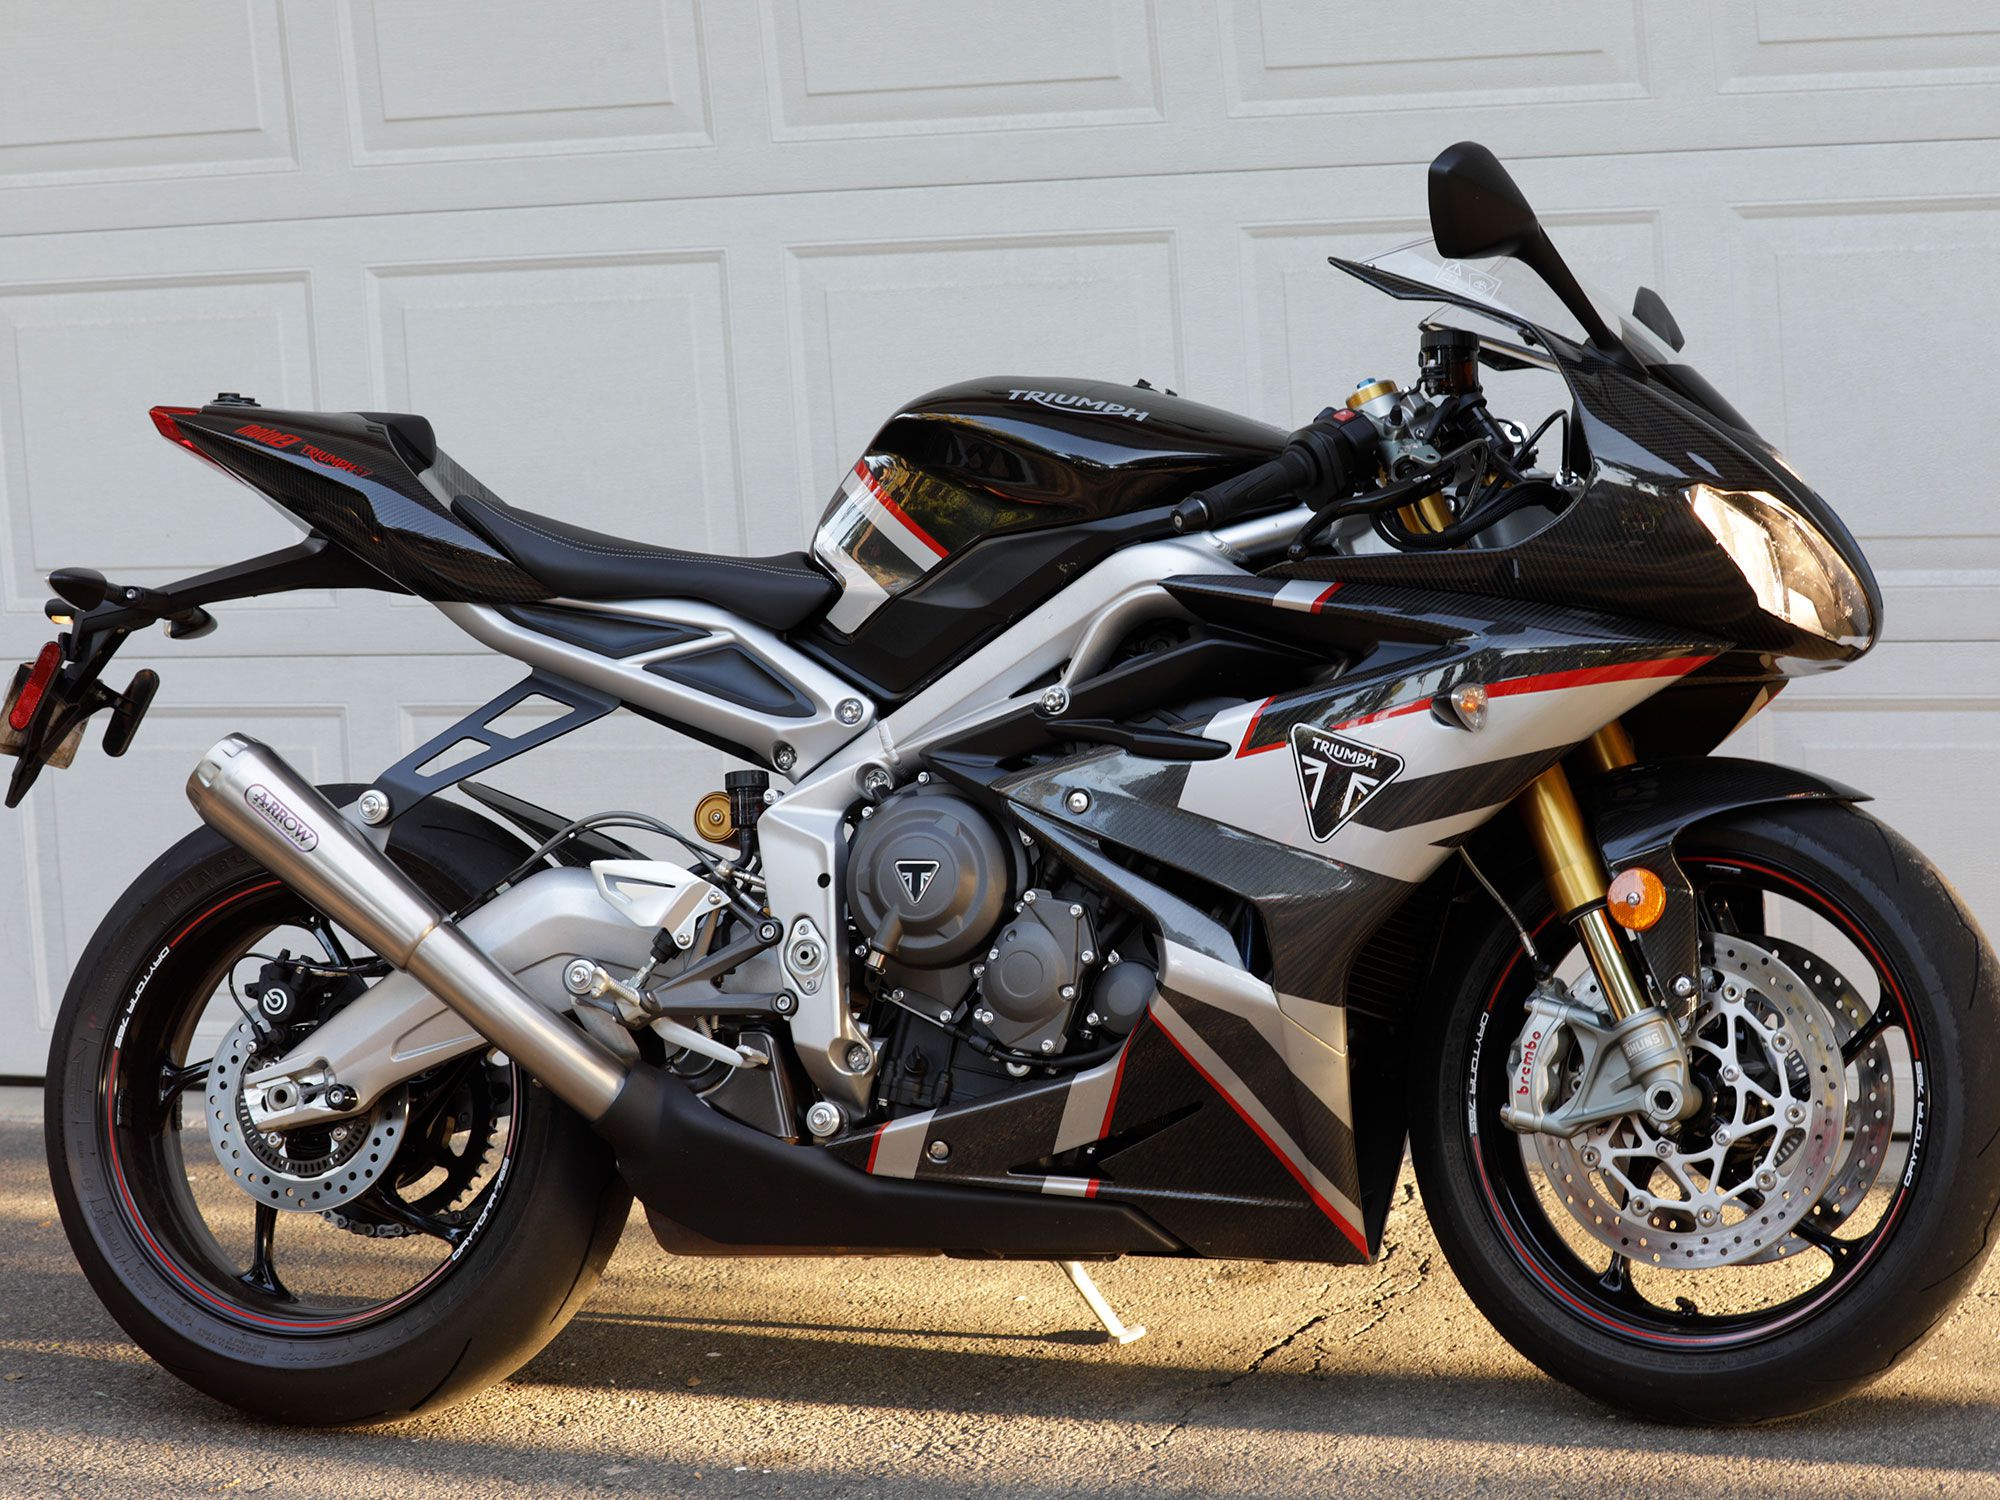 For those who want to own a piece of grand prix racing history that they can ride to work, enter the $17,500 Triumph Daytona Moto2 765 Limited Edition.